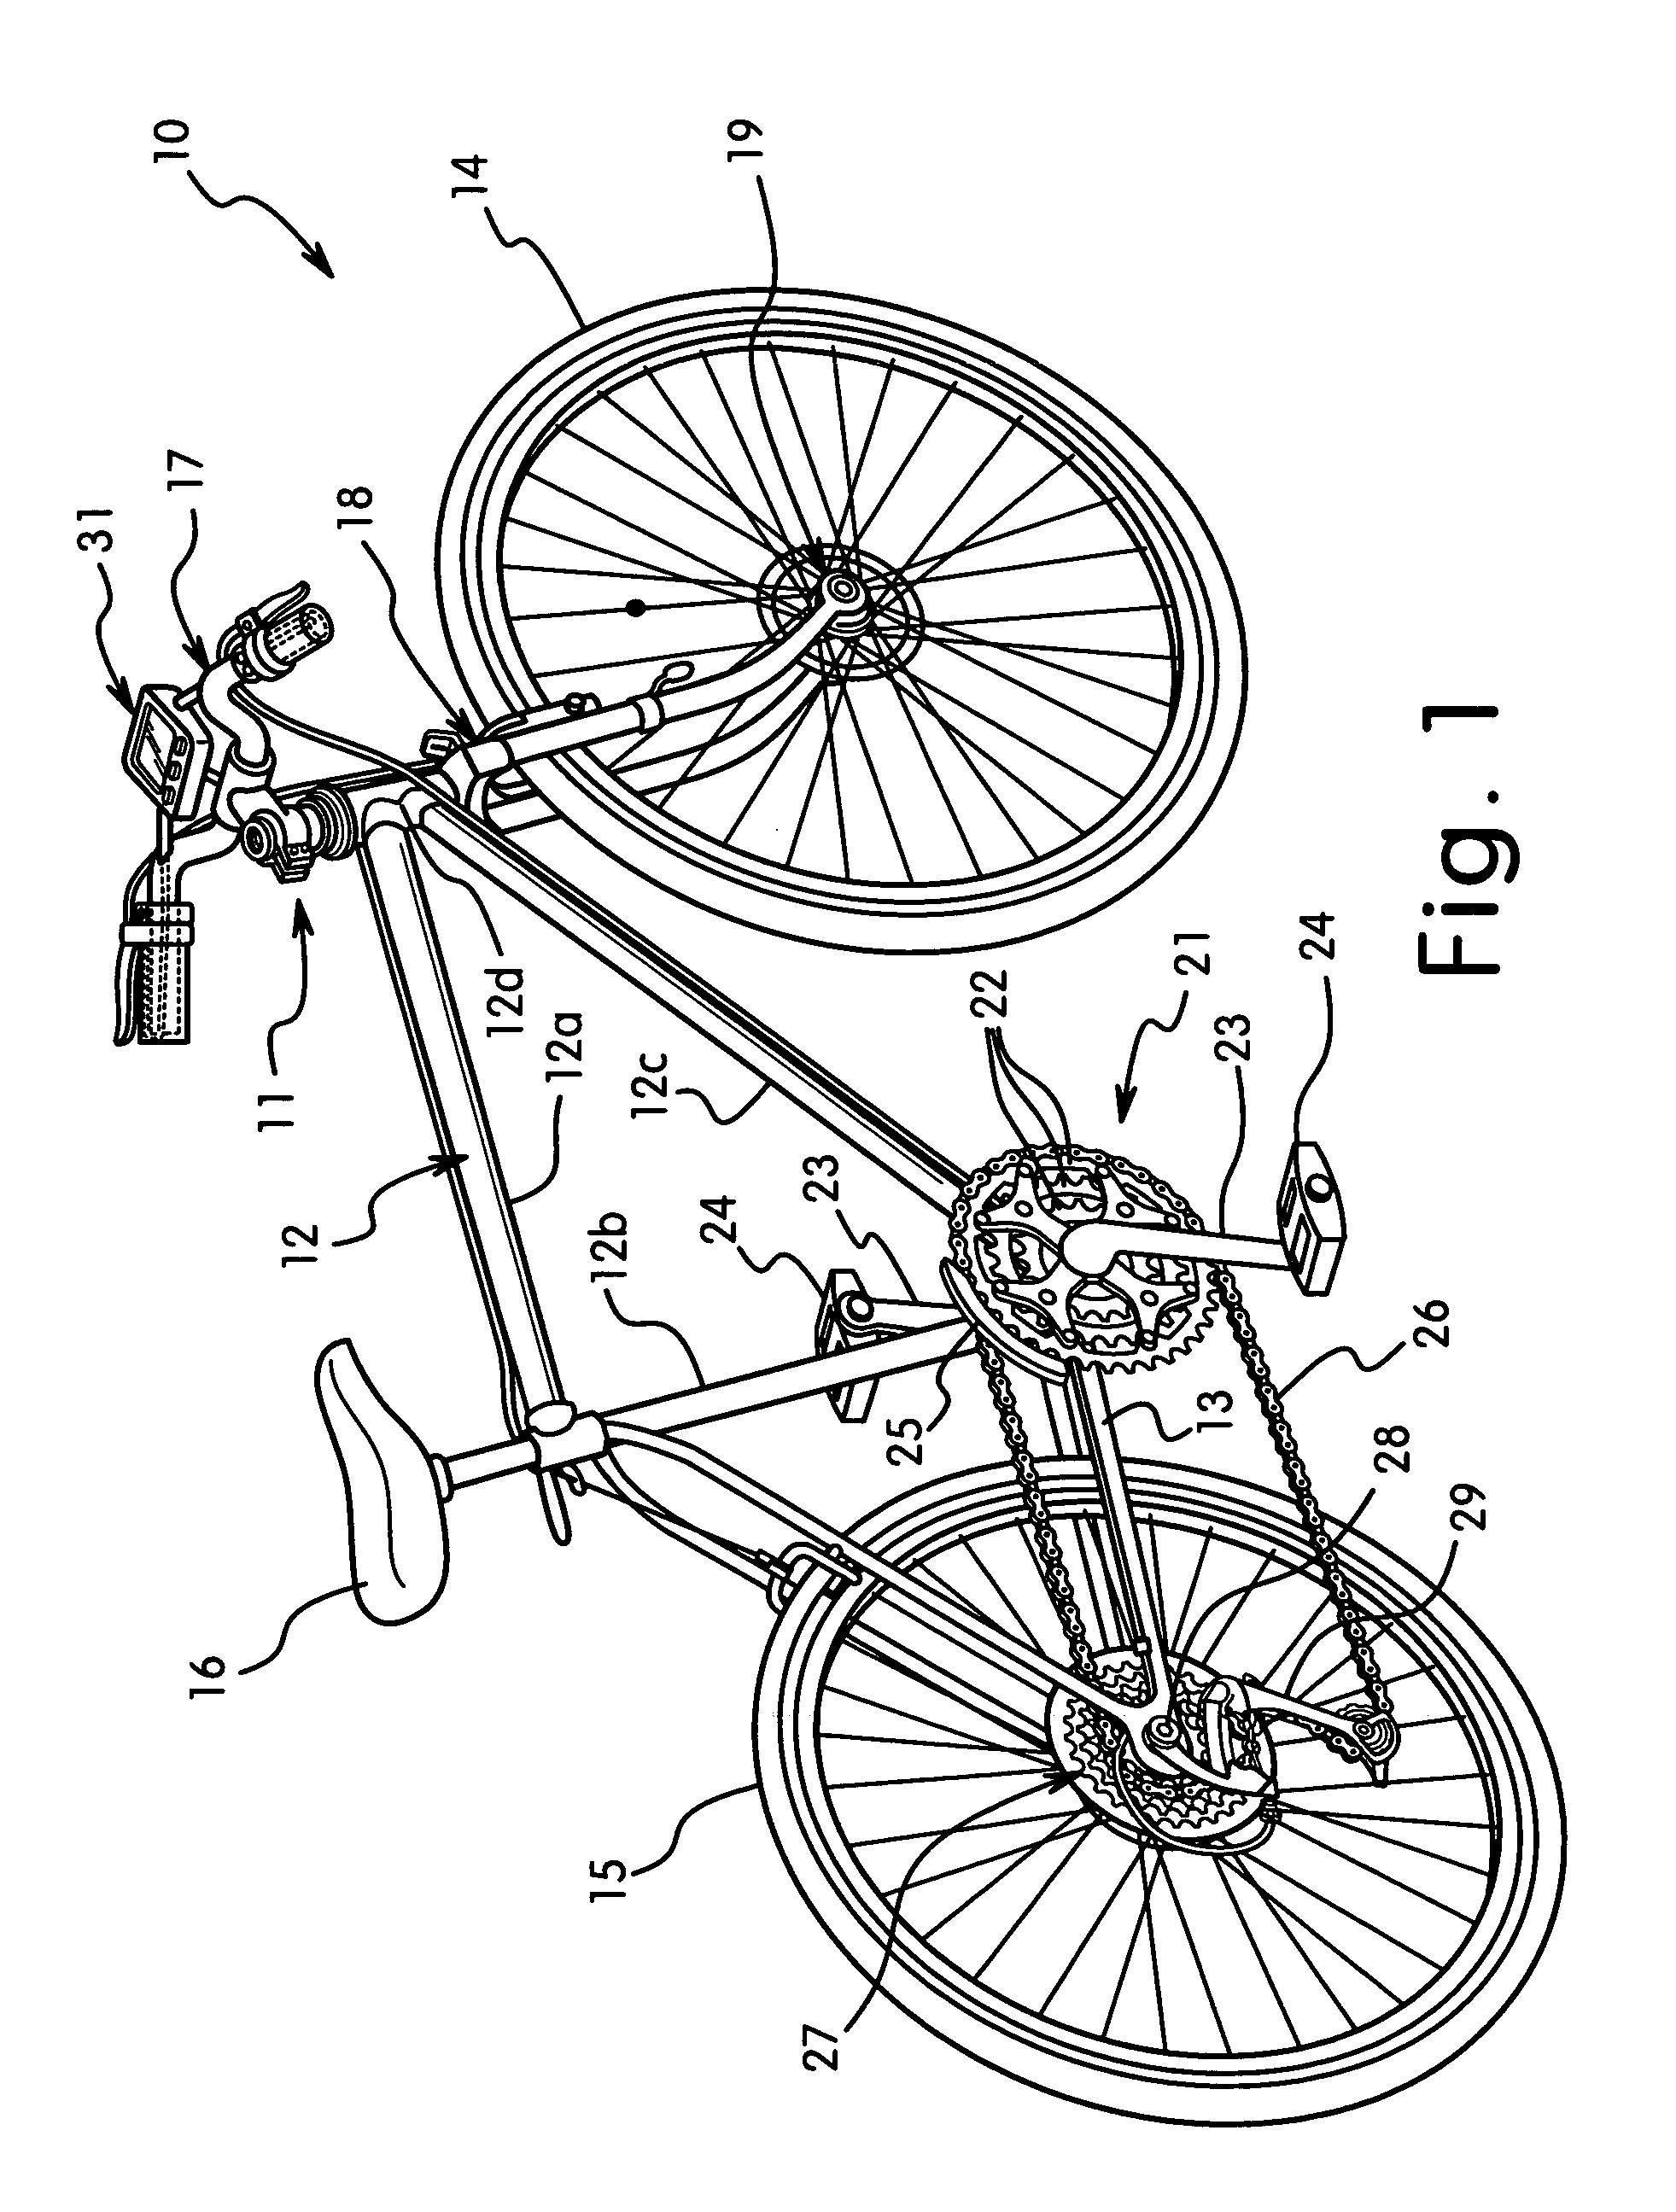 Bicycle headset structure